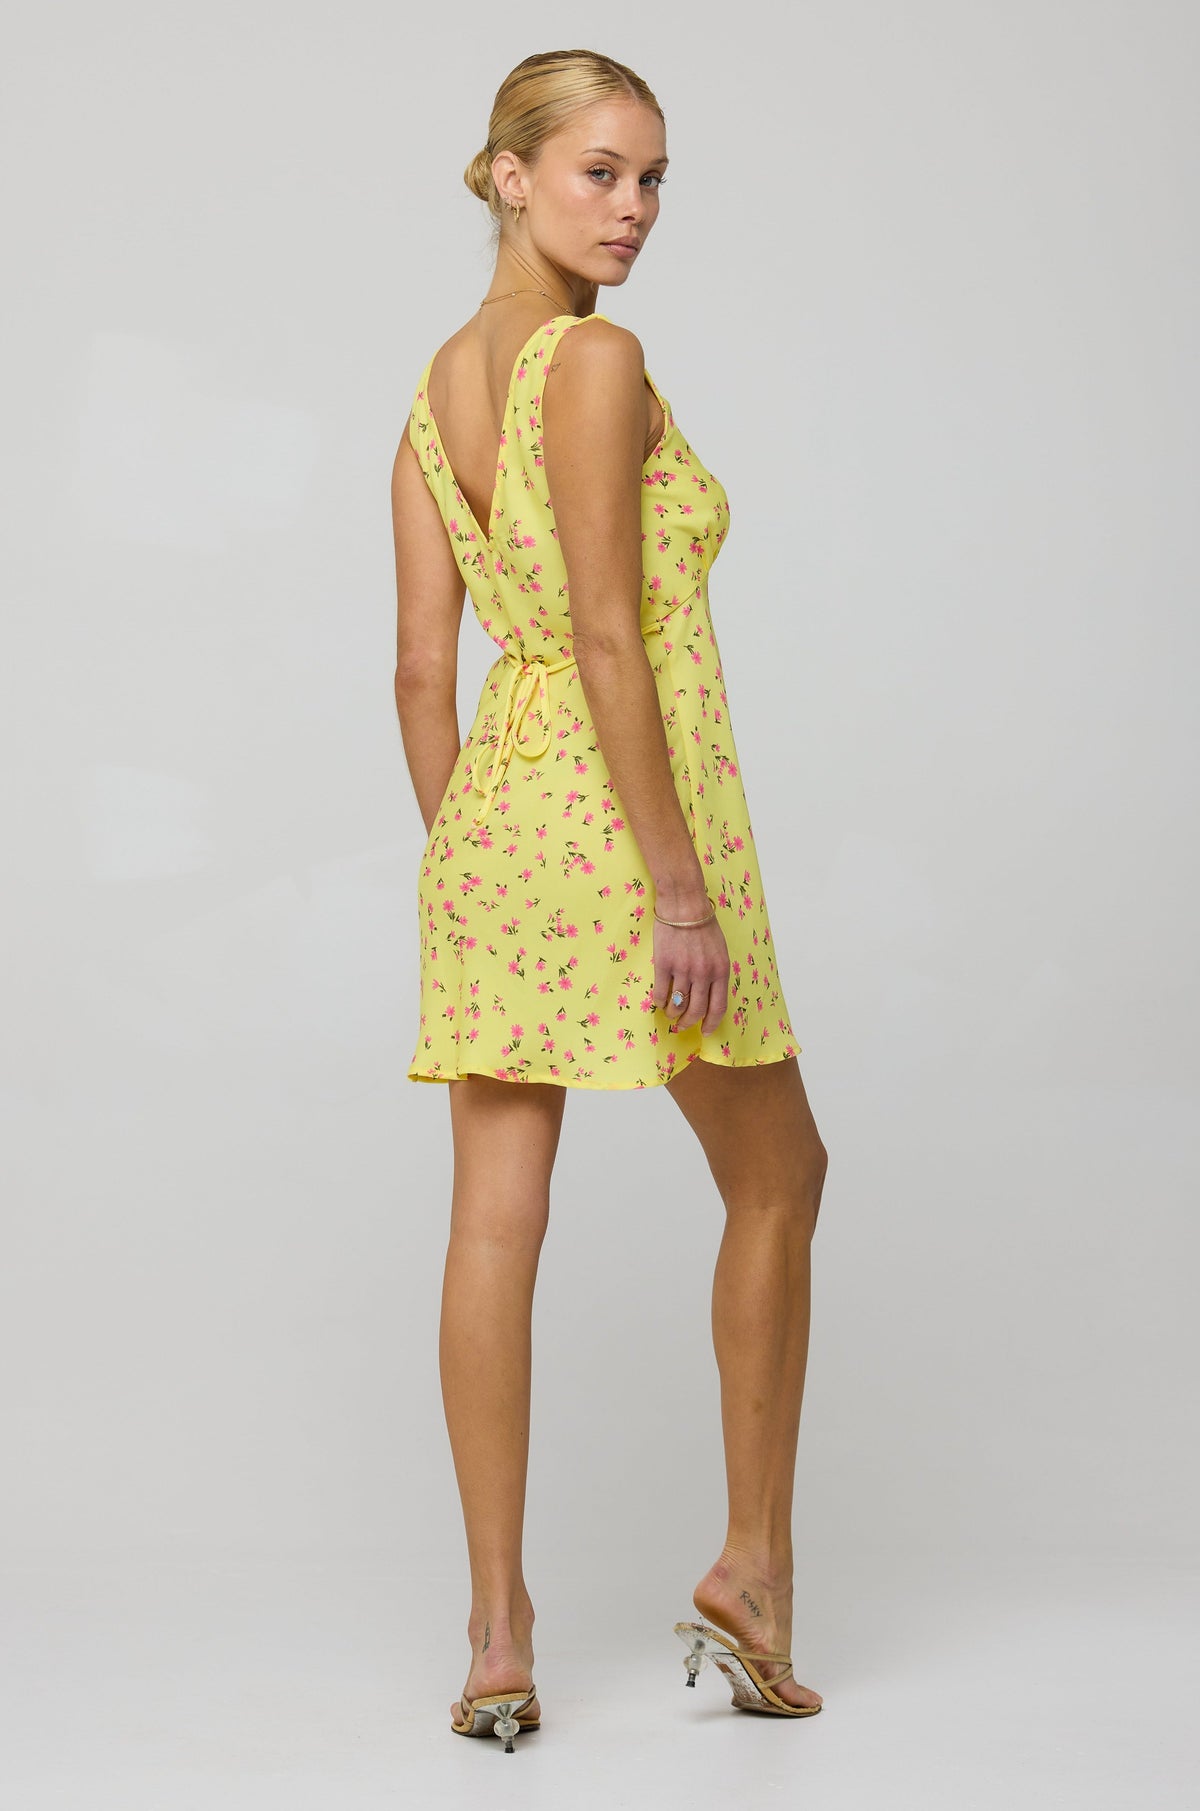 This is an image of Frankie Mini in Honey - RESA featuring a model wearing the dress